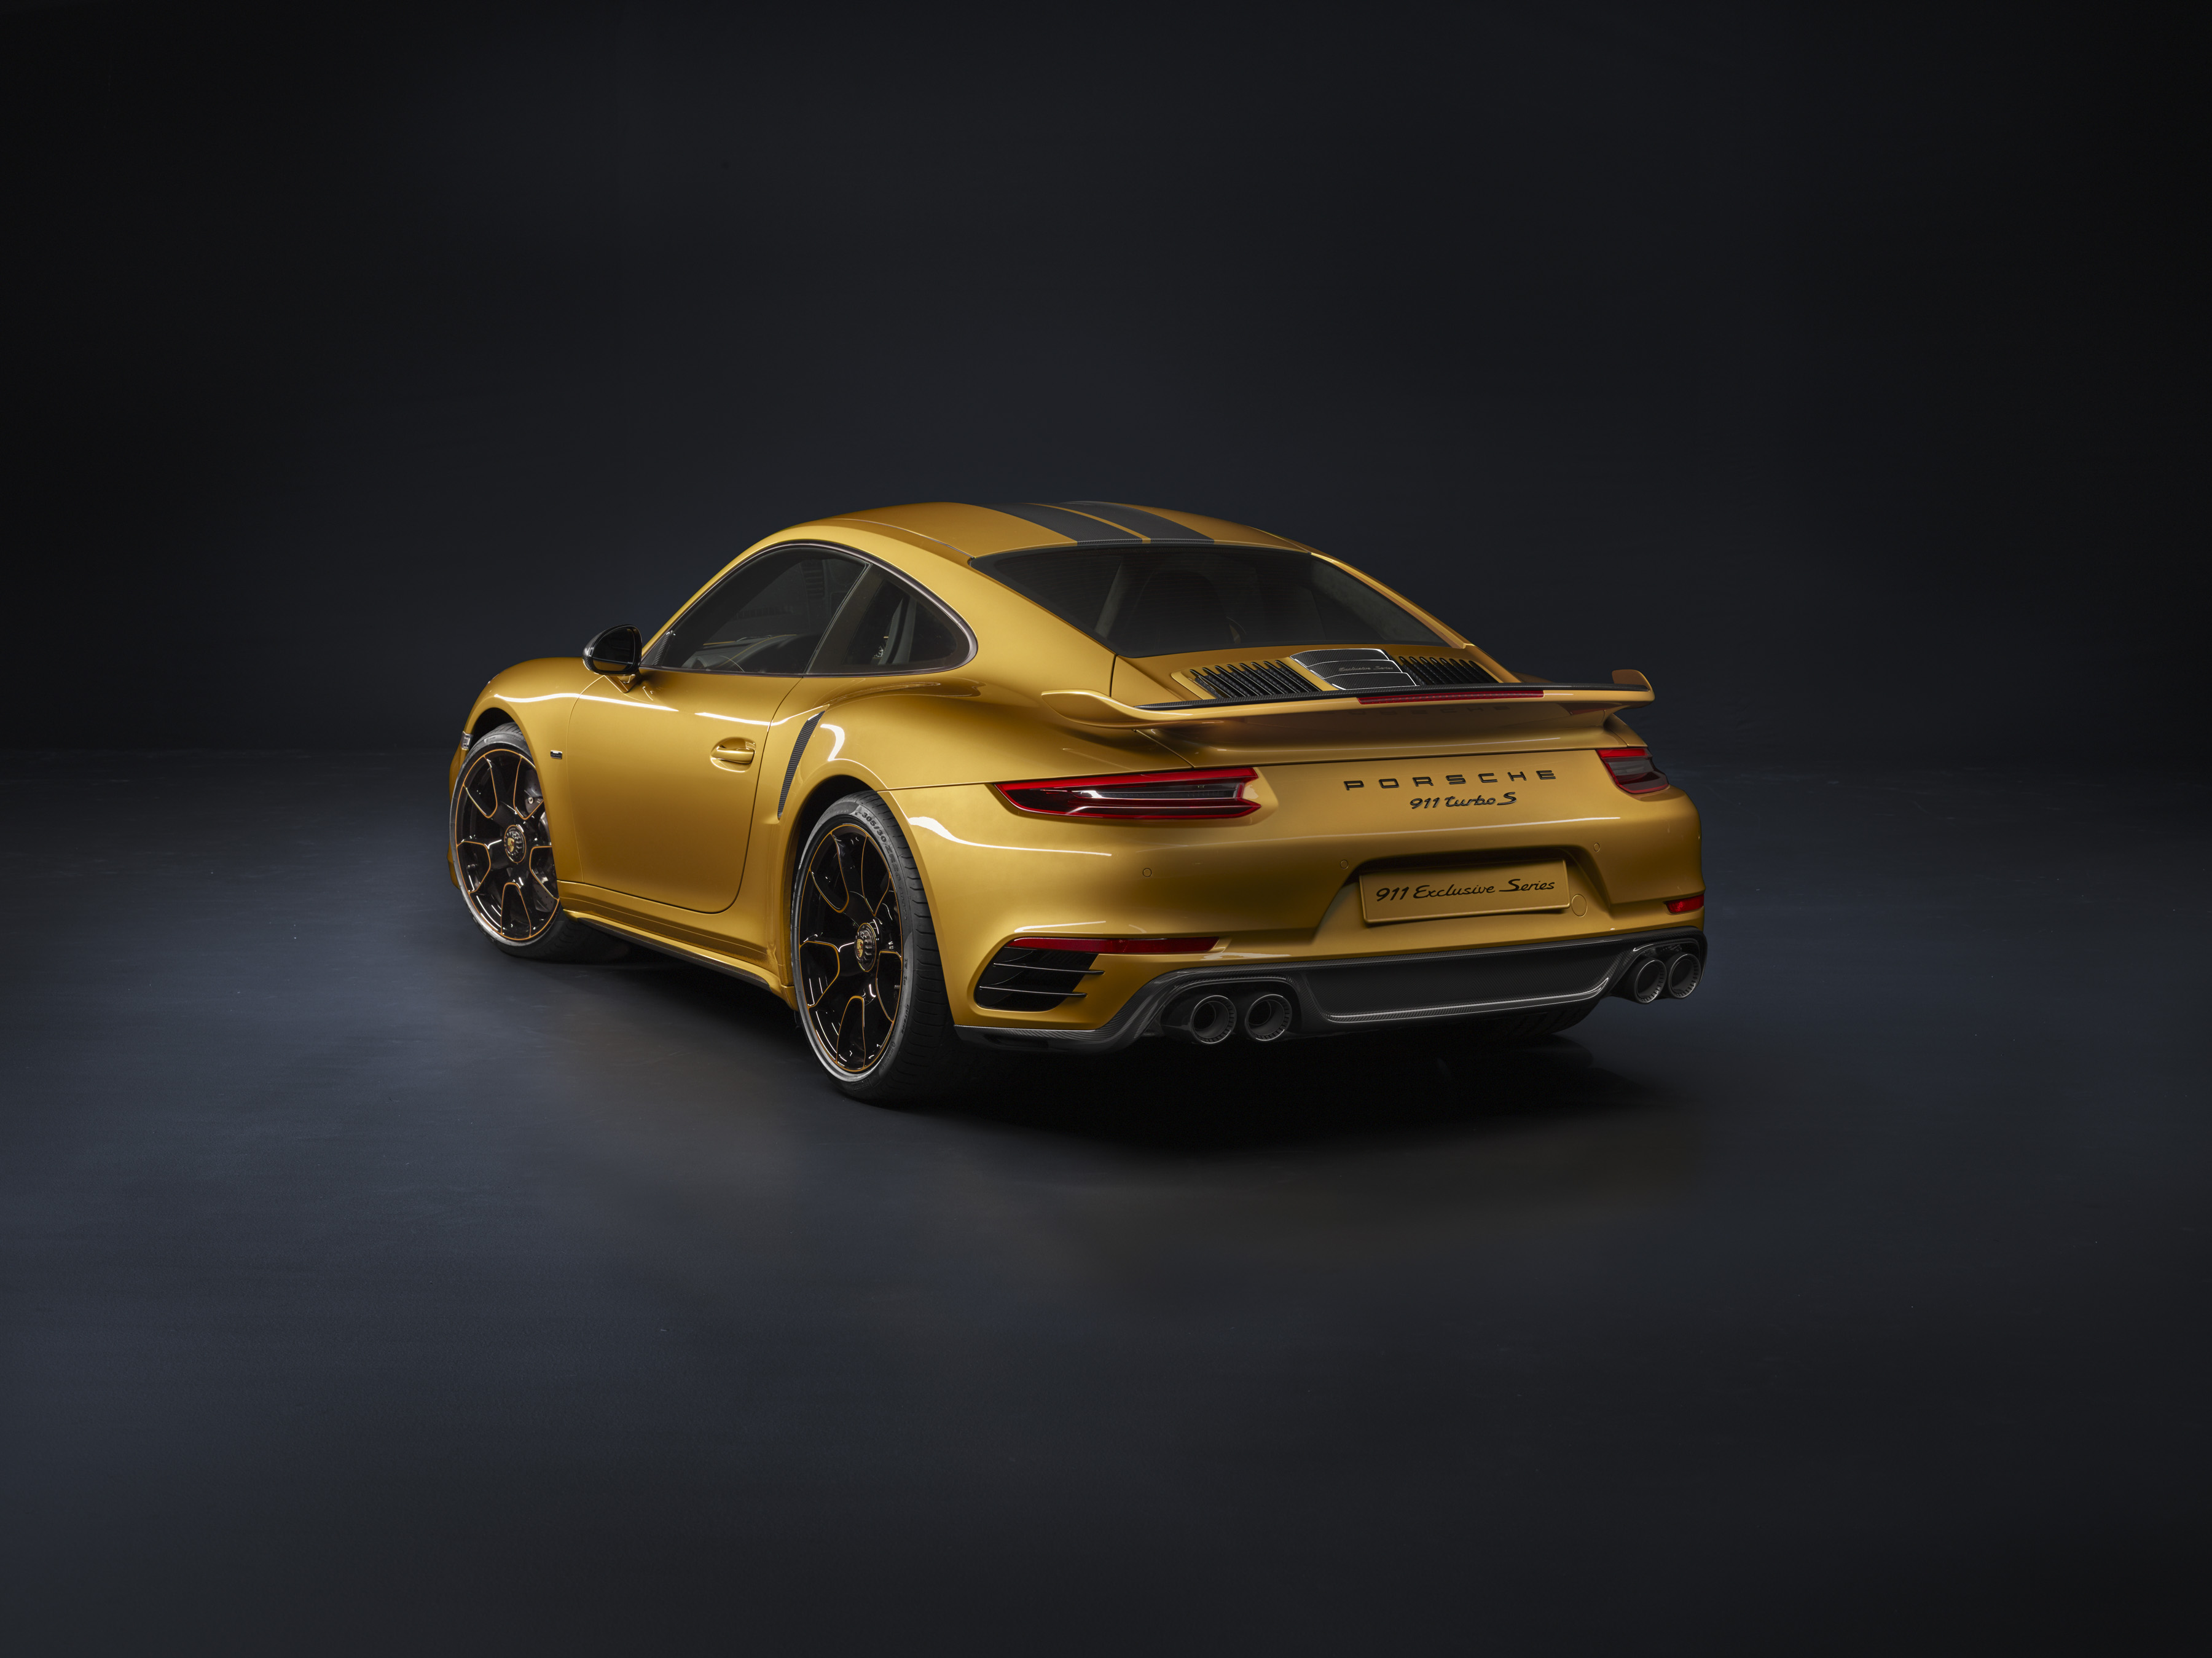 Porsche Exclusive Reveal Special Edition Turbo S Total 911